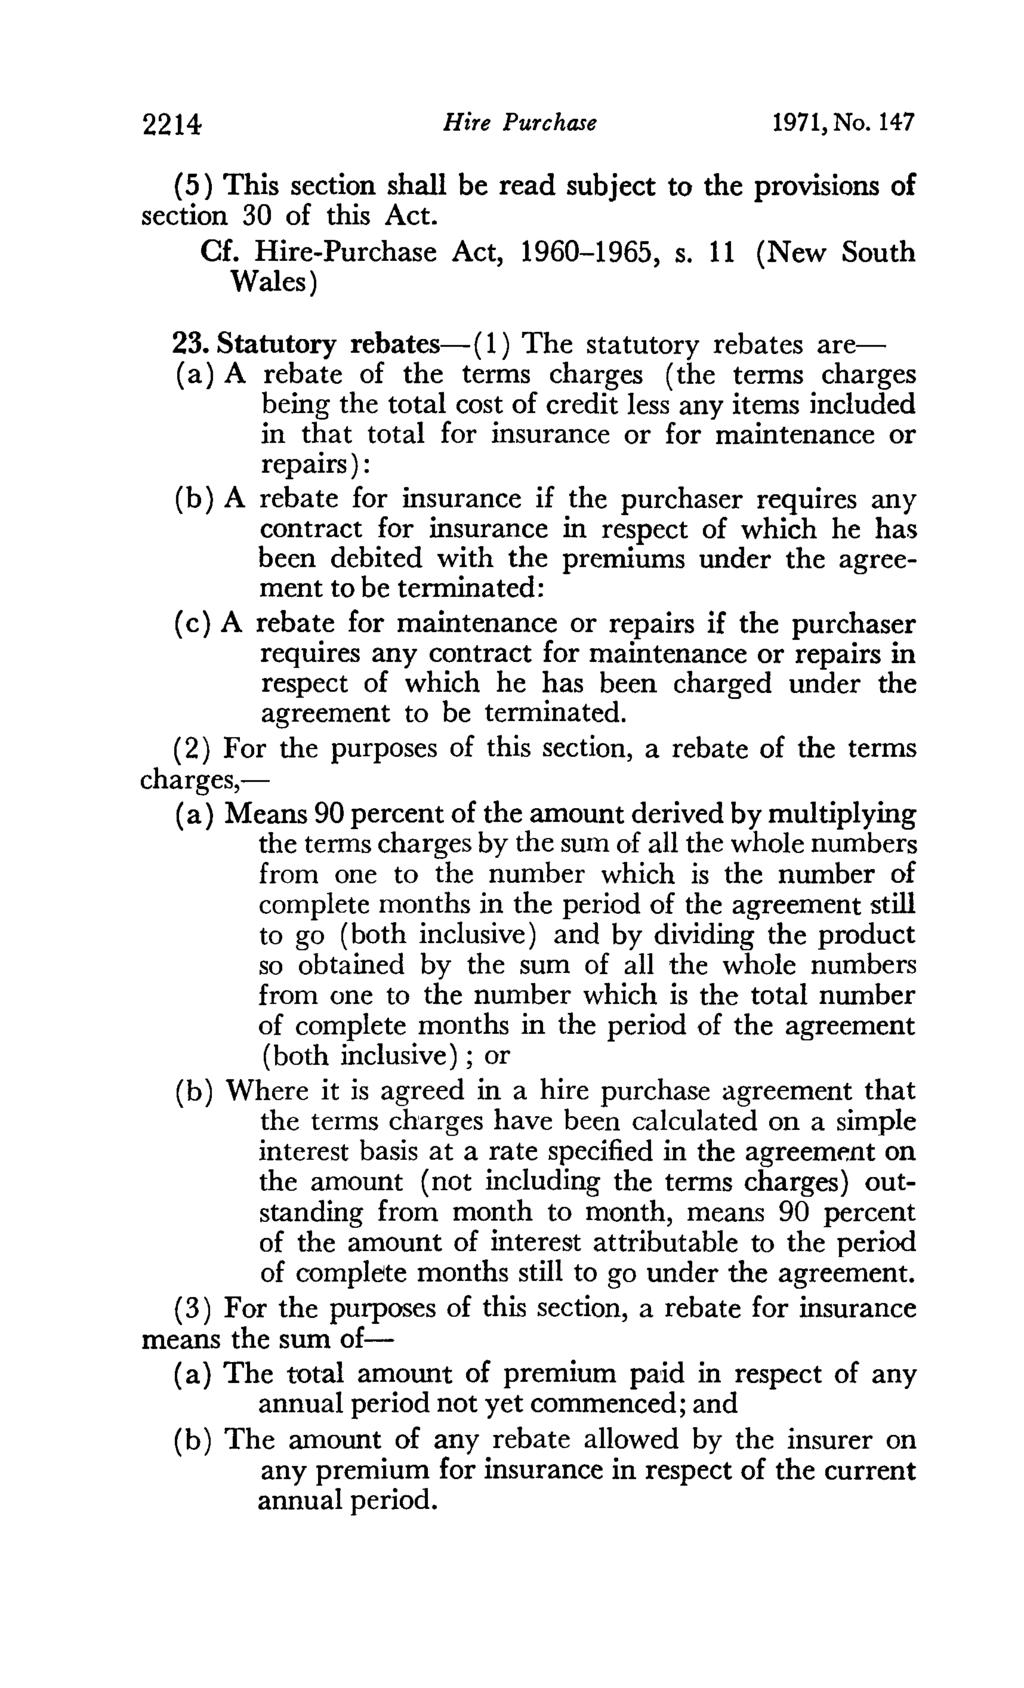 2214 Hire Purchase 1971, No. 147 (5) This section shall be read subject to the provisions of section 30 of this Act. Cf. Hire-Purchase Act, 1960-1965, s. 11 (New South Wales) 23.